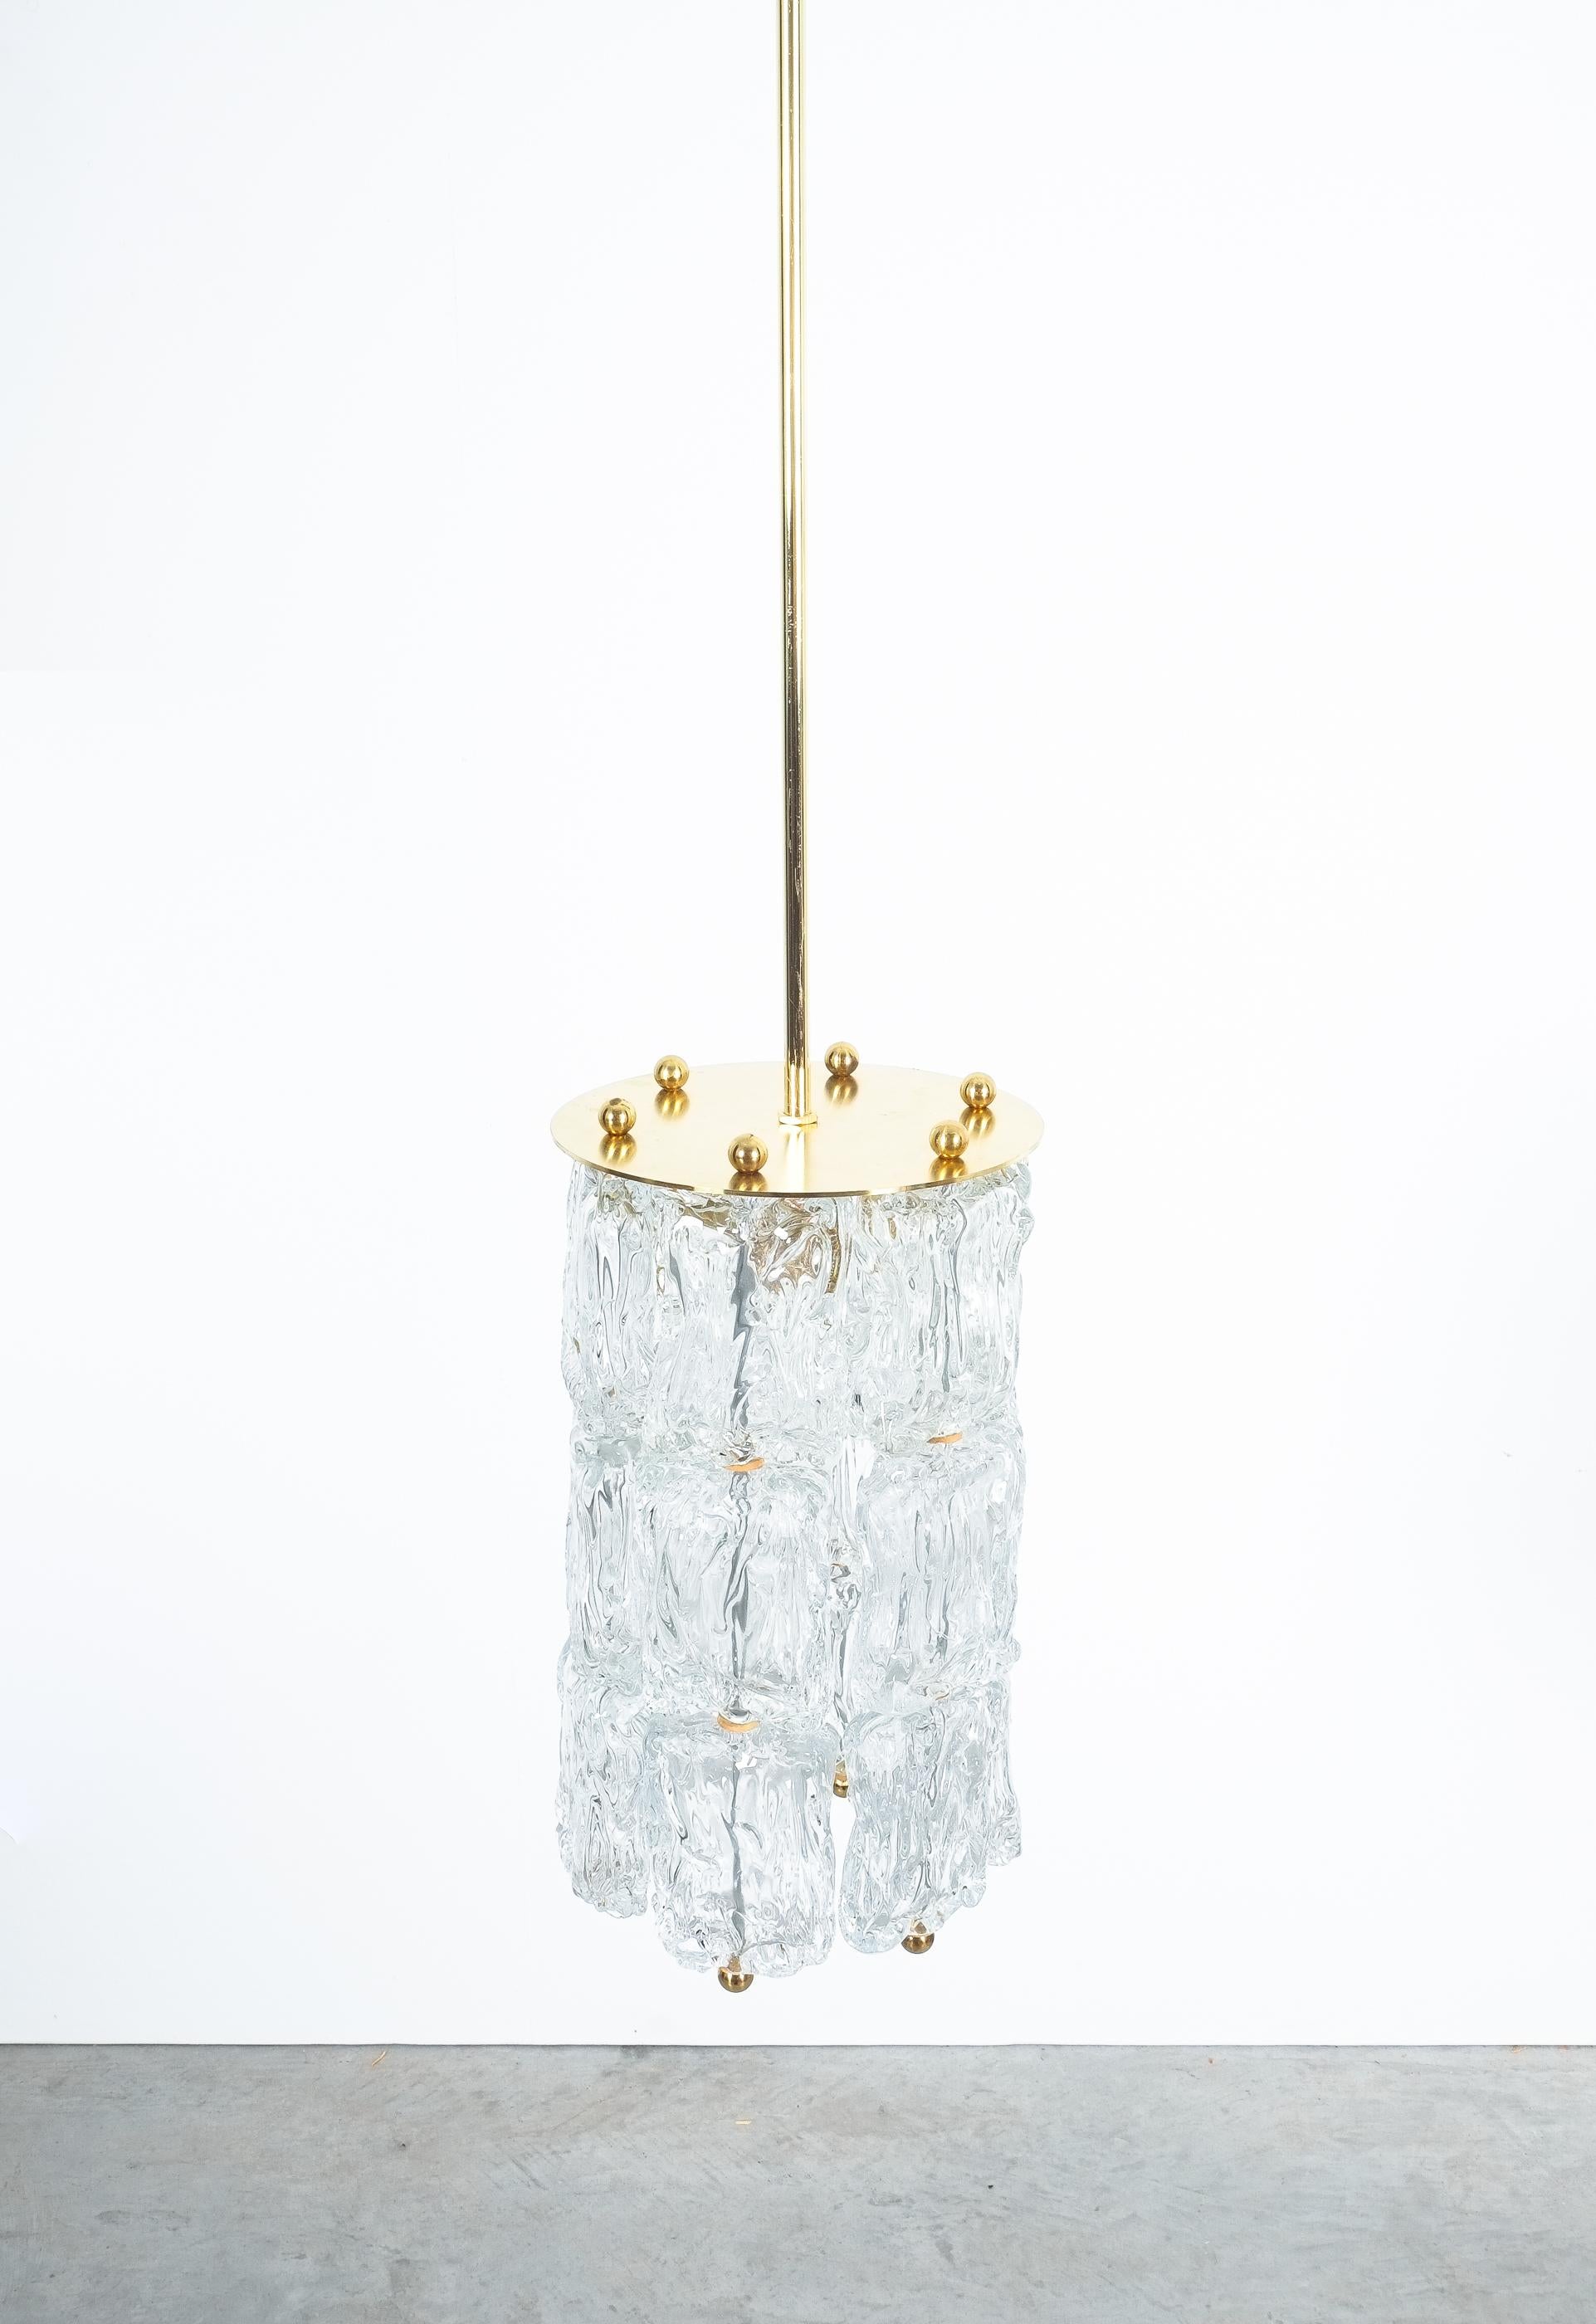 Mid-20th Century For Lucinda Barovier Toso Murano Glass Pendant Lamps (3 pieces), Italy 